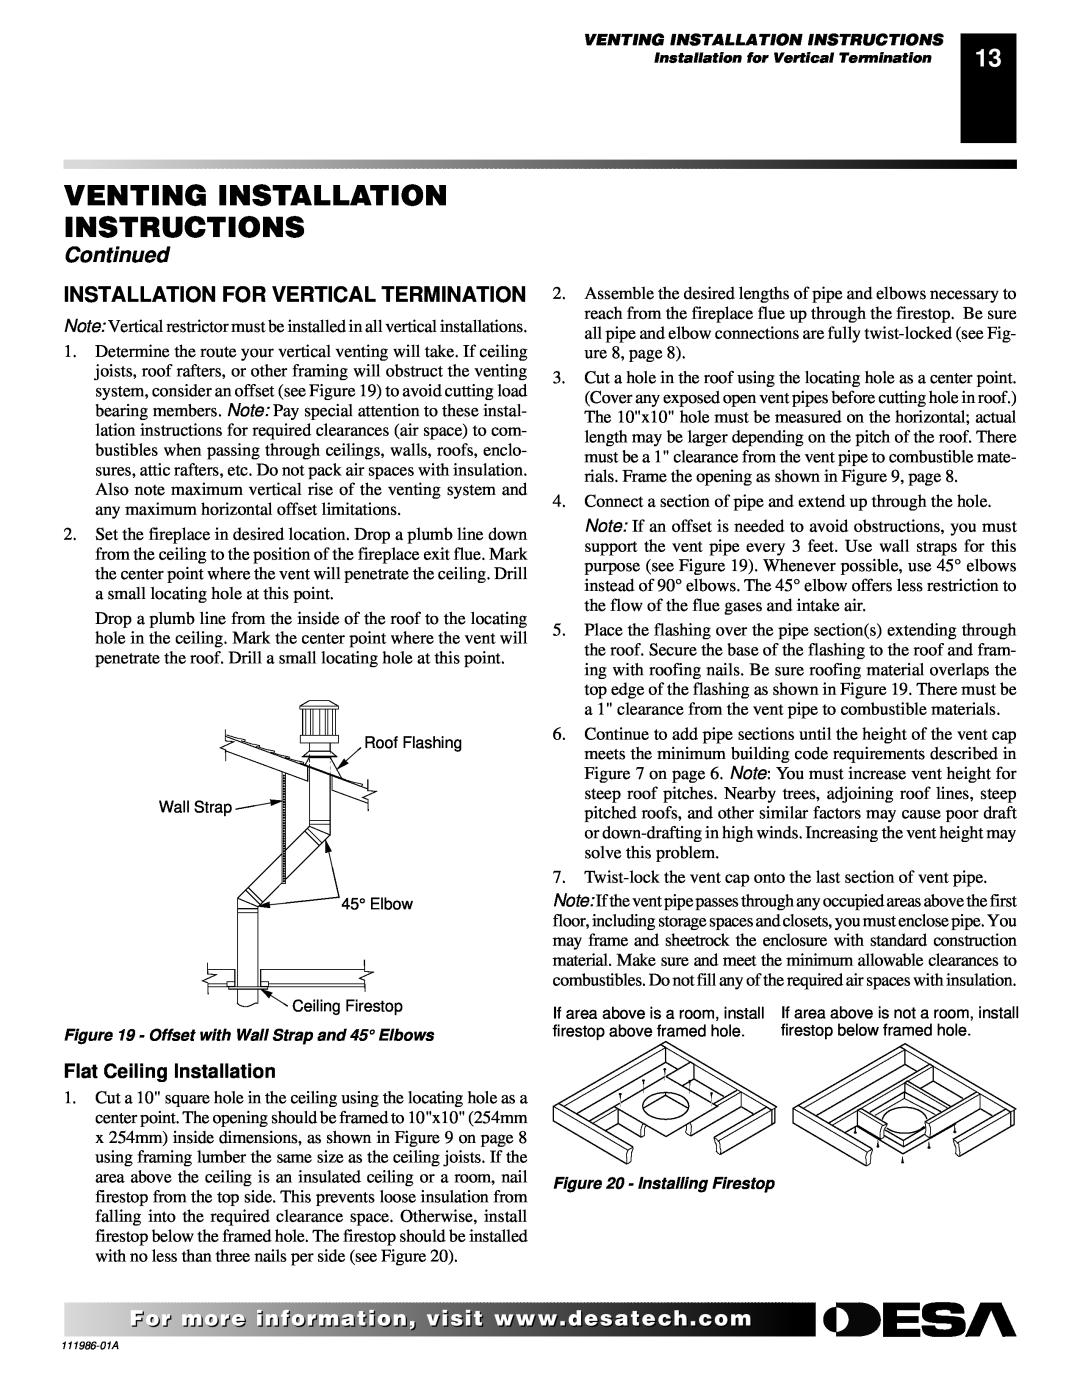 Desa T32N Installation For Vertical Termination, Flat Ceiling Installation, Venting Installation Instructions, Continued 